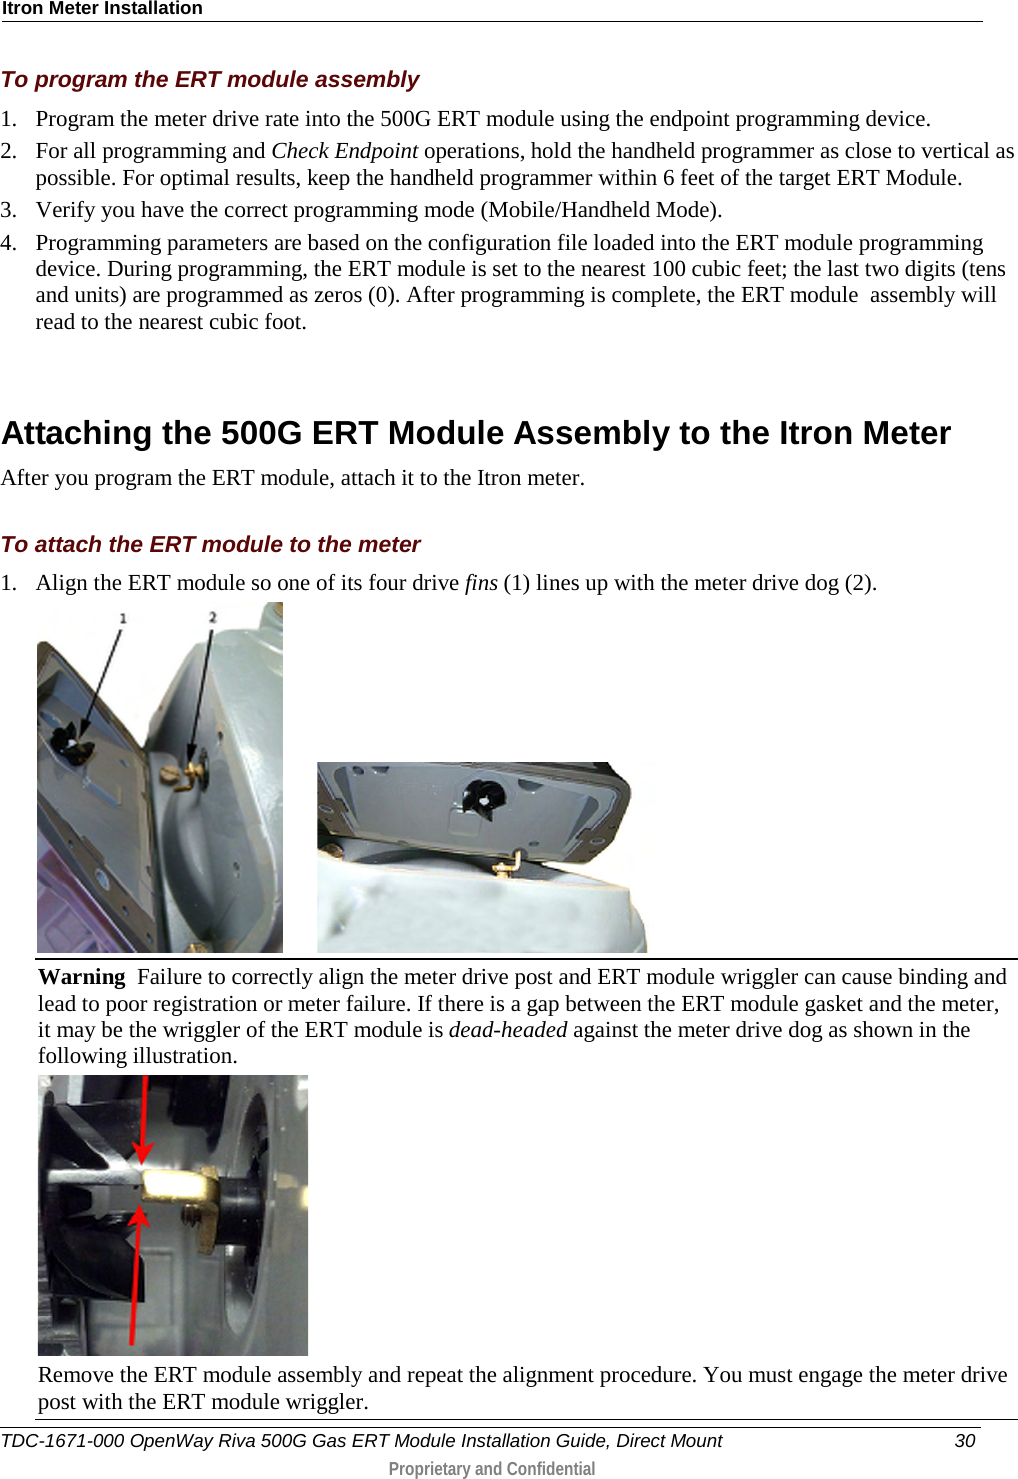 Itron Meter Installation  To program the ERT module assembly 1. Program the meter drive rate into the 500G ERT module using the endpoint programming device.  2. For all programming and Check Endpoint operations, hold the handheld programmer as close to vertical as possible. For optimal results, keep the handheld programmer within 6 feet of the target ERT Module.  3. Verify you have the correct programming mode (Mobile/Handheld Mode).  4. Programming parameters are based on the configuration file loaded into the ERT module programming device. During programming, the ERT module is set to the nearest 100 cubic feet; the last two digits (tens and units) are programmed as zeros (0). After programming is complete, the ERT module  assembly will read to the nearest cubic foot.    Attaching the 500G ERT Module Assembly to the Itron Meter After you program the ERT module, attach it to the Itron meter.   To attach the ERT module to the meter 1. Align the ERT module so one of its four drive fins (1) lines up with the meter drive dog (2).          Warning  Failure to correctly align the meter drive post and ERT module wriggler can cause binding and lead to poor registration or meter failure. If there is a gap between the ERT module gasket and the meter, it may be the wriggler of the ERT module is dead-headed against the meter drive dog as shown in the following illustration.   Remove the ERT module assembly and repeat the alignment procedure. You must engage the meter drive post with the ERT module wriggler.  TDC-1671-000 OpenWay Riva 500G Gas ERT Module Installation Guide, Direct Mount 30  Proprietary and Confidential    